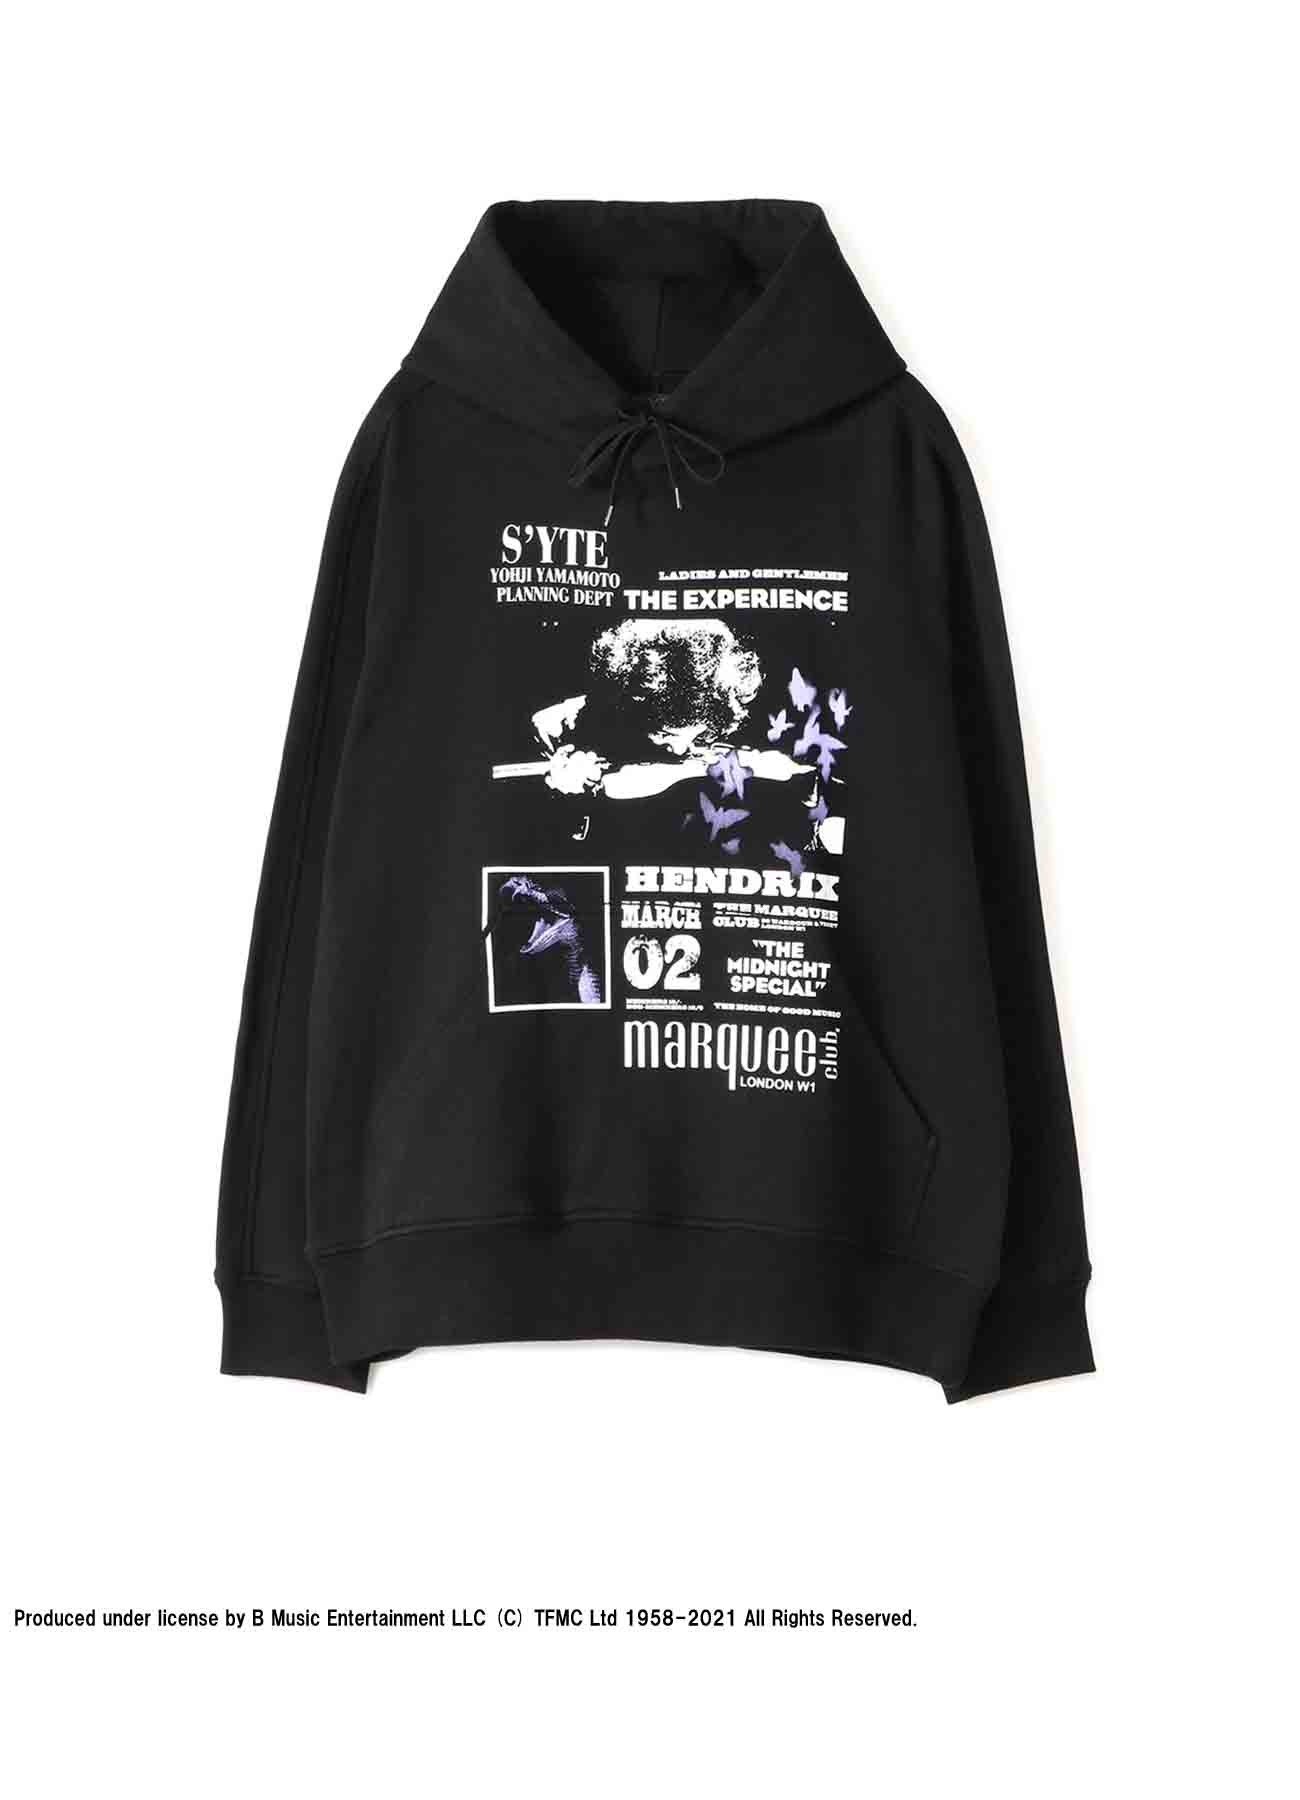 S’YTE × marquee club(R) French Terry Stitch Work Collage Hoodie